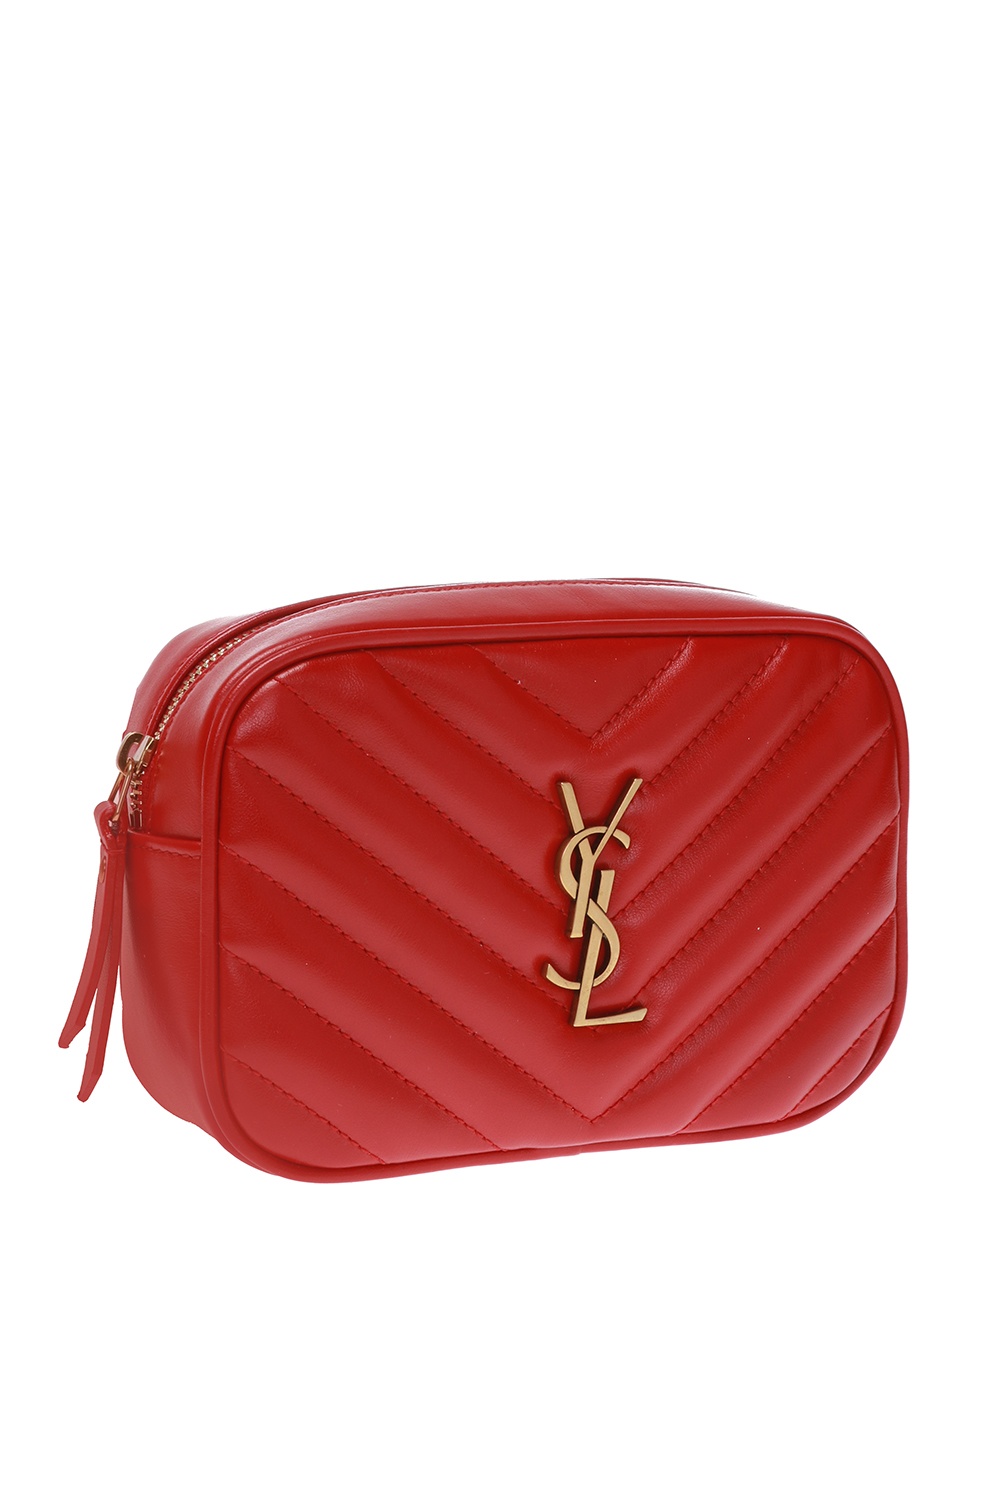 Saint Laurent Lou Belt Bag in Quilted Leather